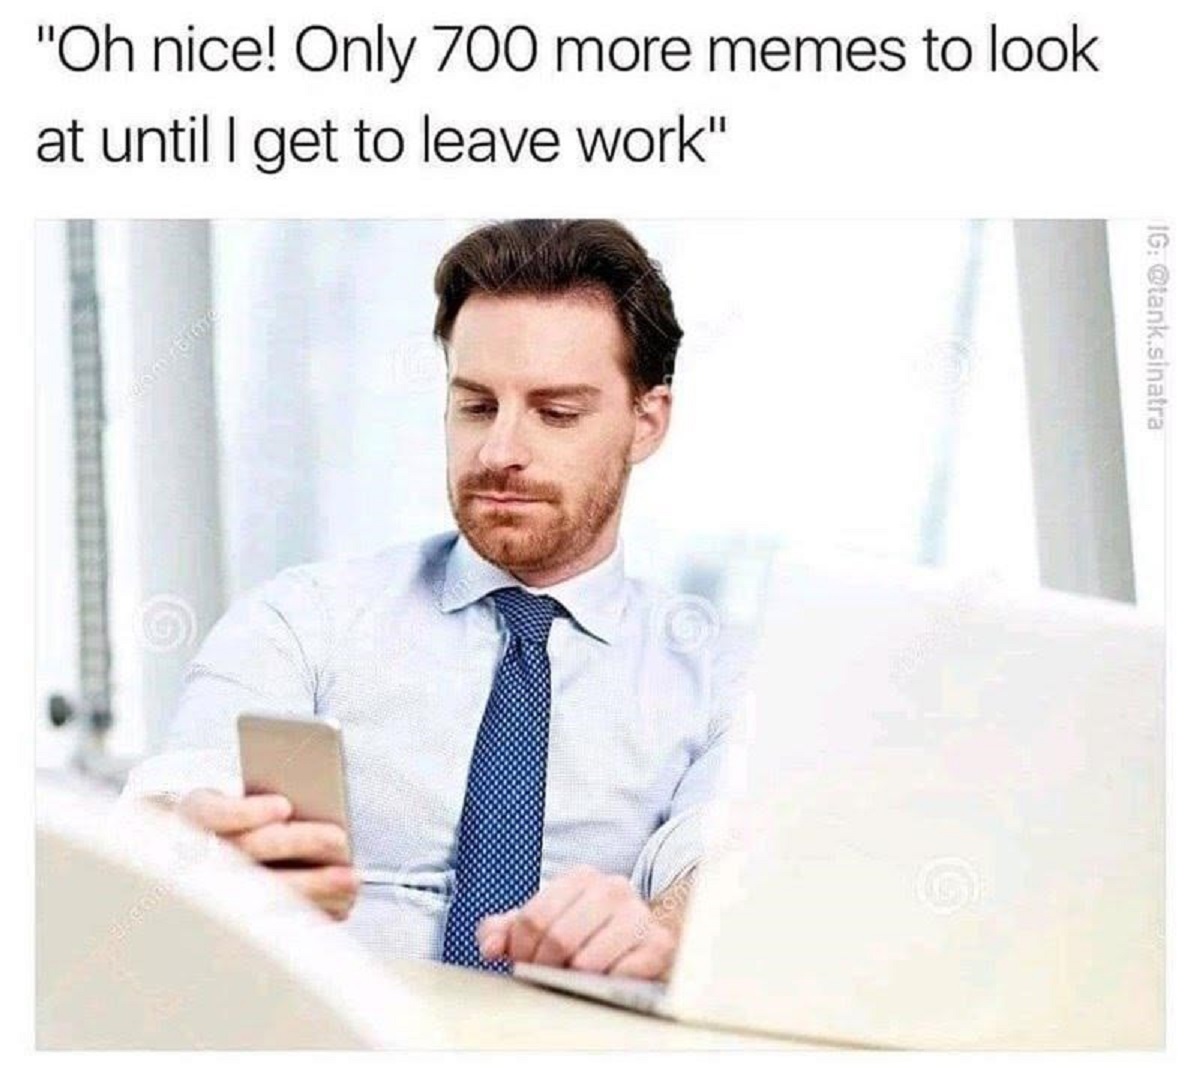 working stiff meme - "Oh nice! Only 700 more memes to look at until I get to leave work" canmirtime Posta Ig .sinatra